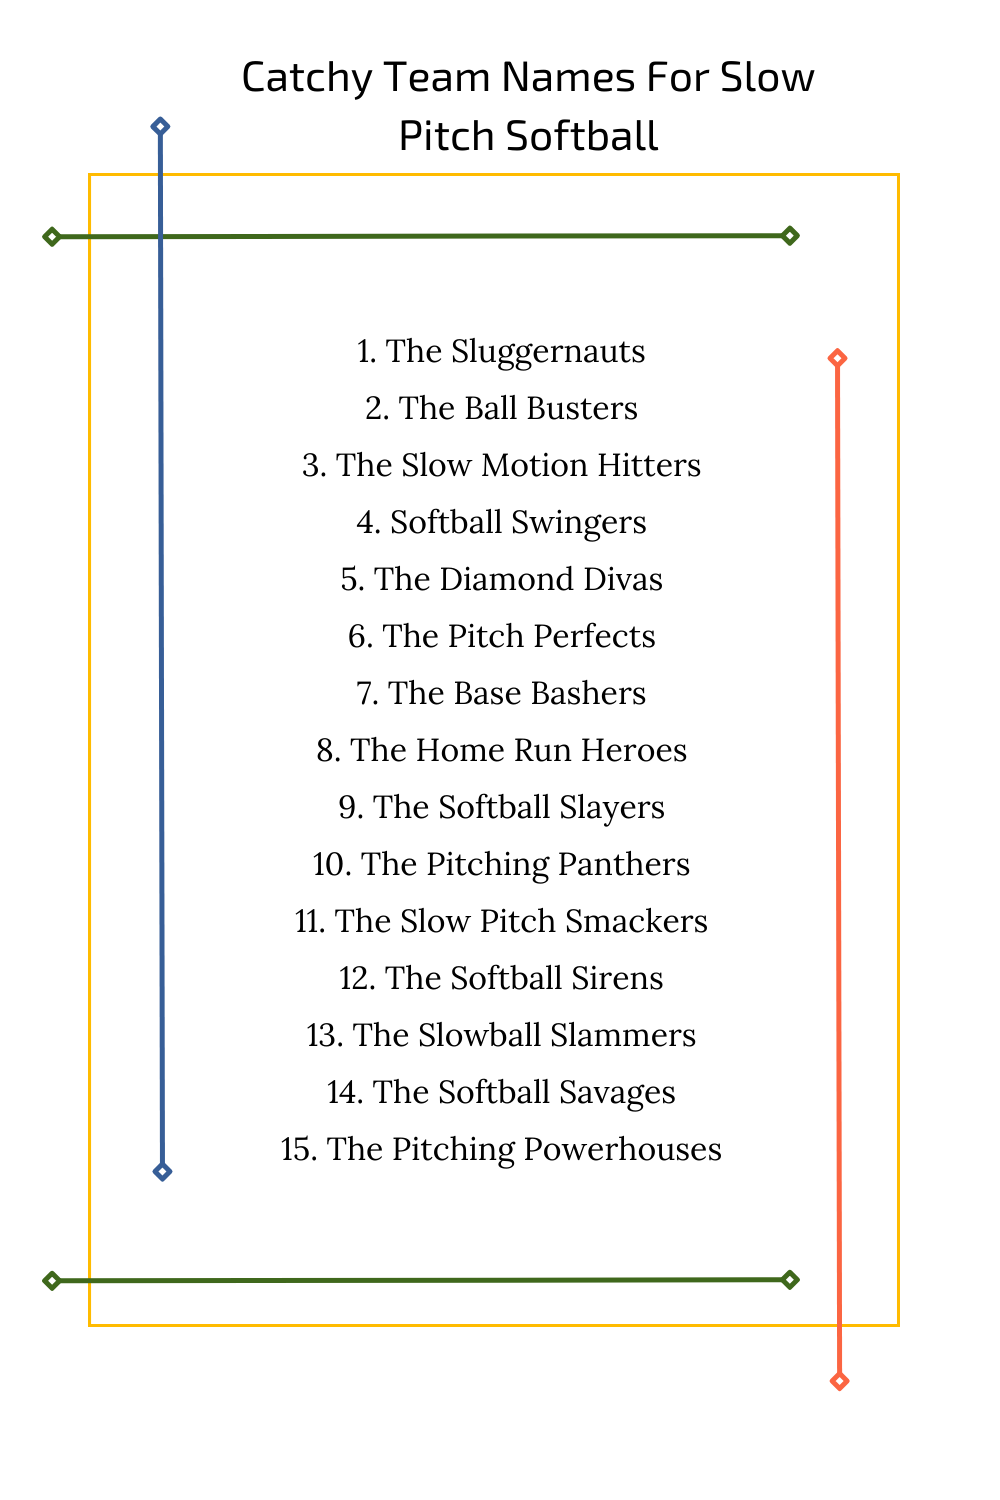 Catchy Team Names For Slow Pitch Softball